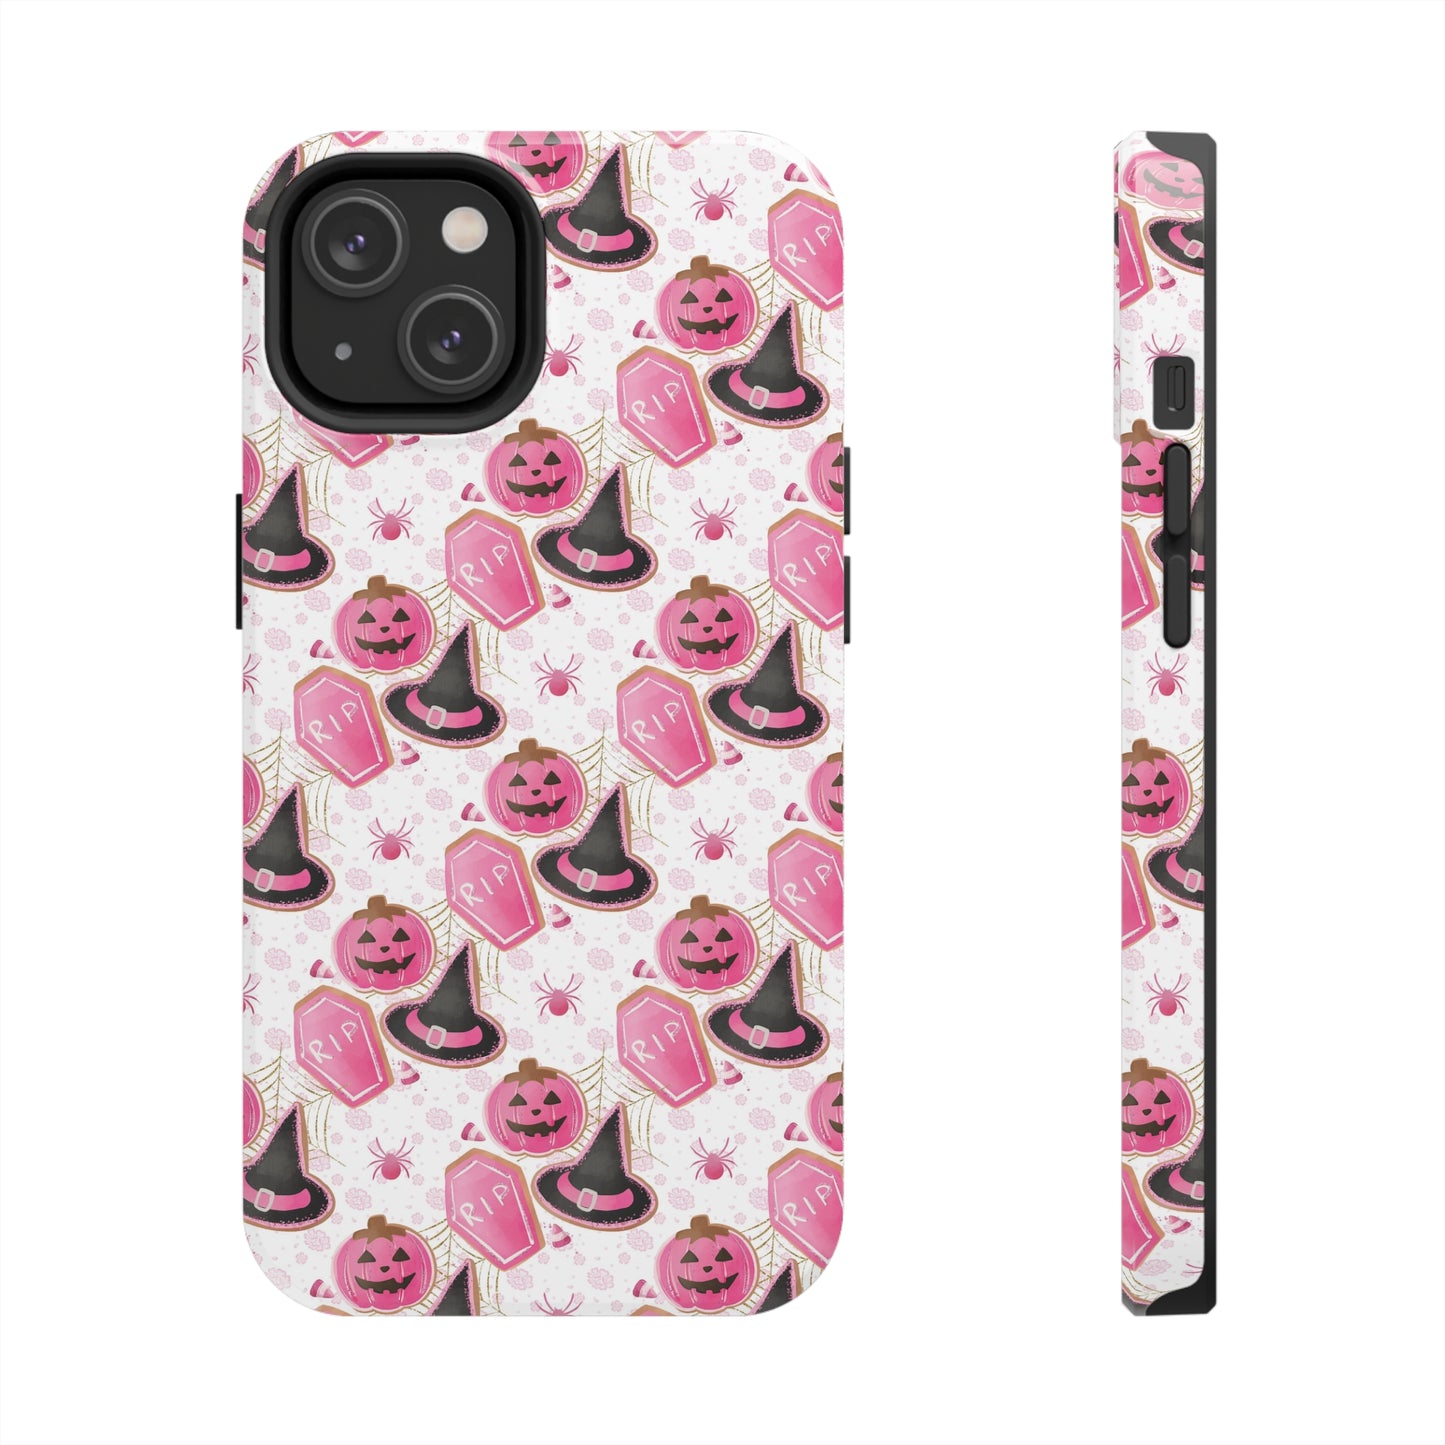 pink halloween iphone case with witch hat,  pink pumpkins and spider  print